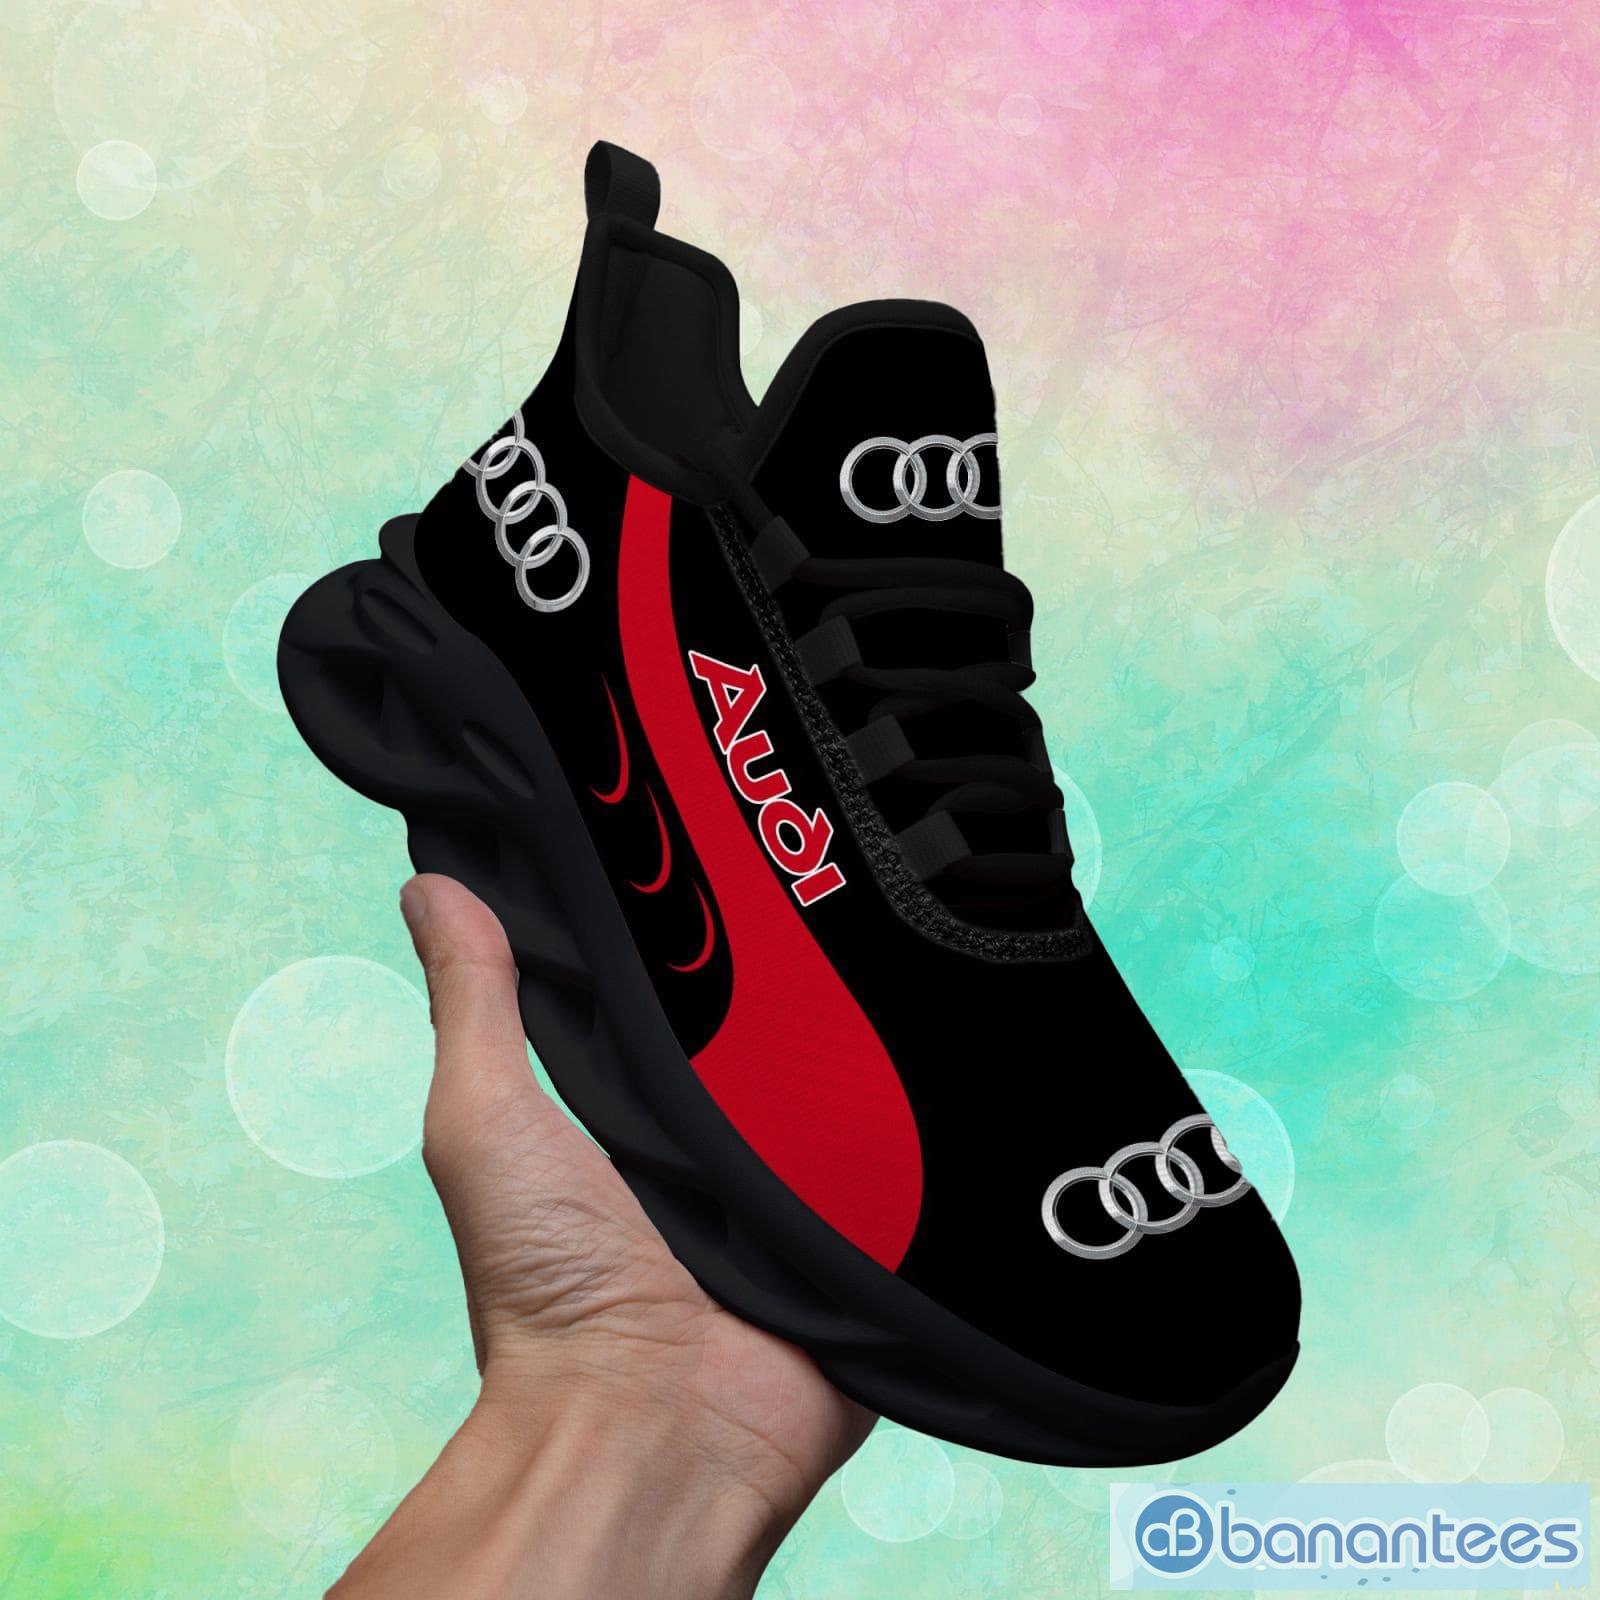 Audi Sport Running Style 43 Max Soul Shoes Men And Women For Fans -  Banantees